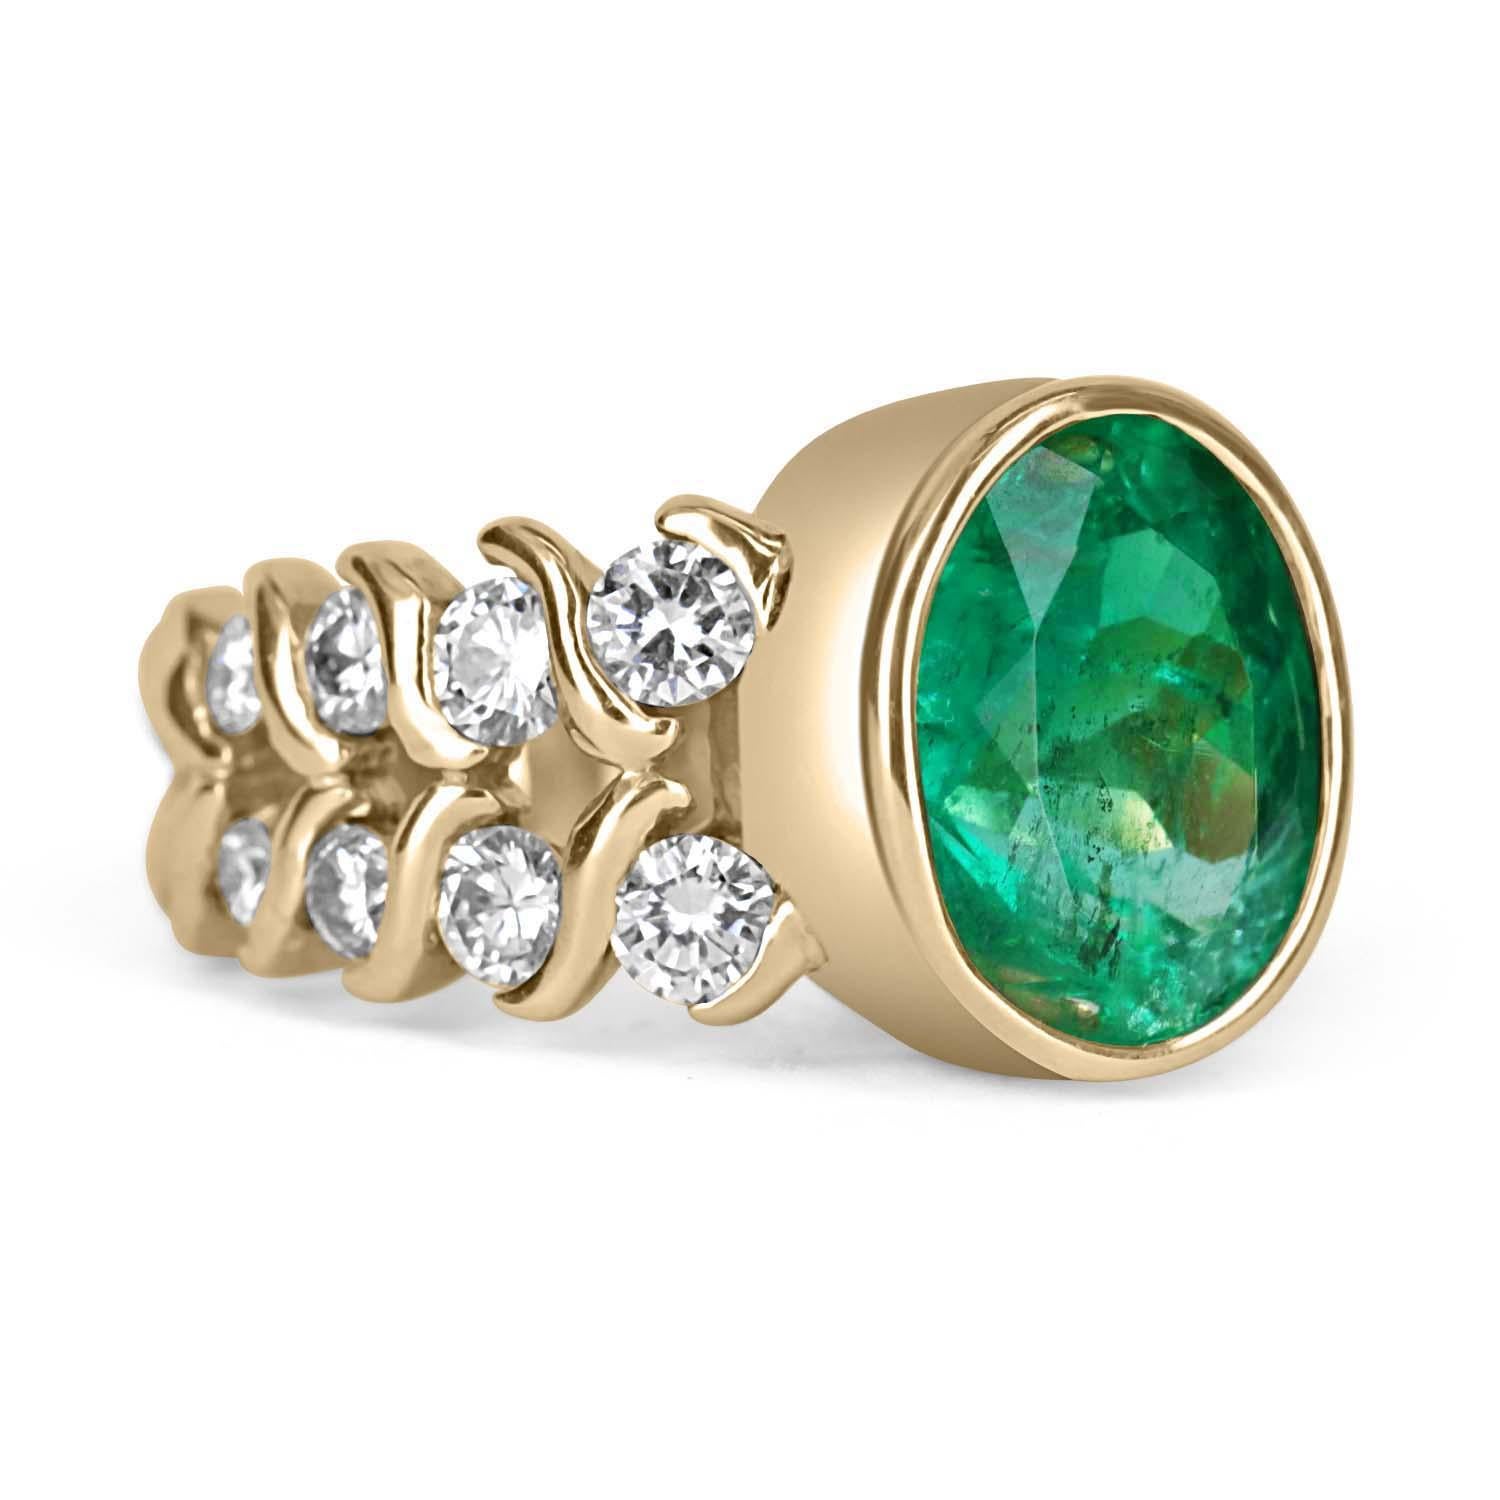 A magnificent, natural Oval Colombian emerald and diamond cocktail ring 14K. The dark-bright green oval Colombian emerald is bezel set and weighs an impressive 4.95-carats. The sublime dark-bright green color of the emerald is further enhanced by